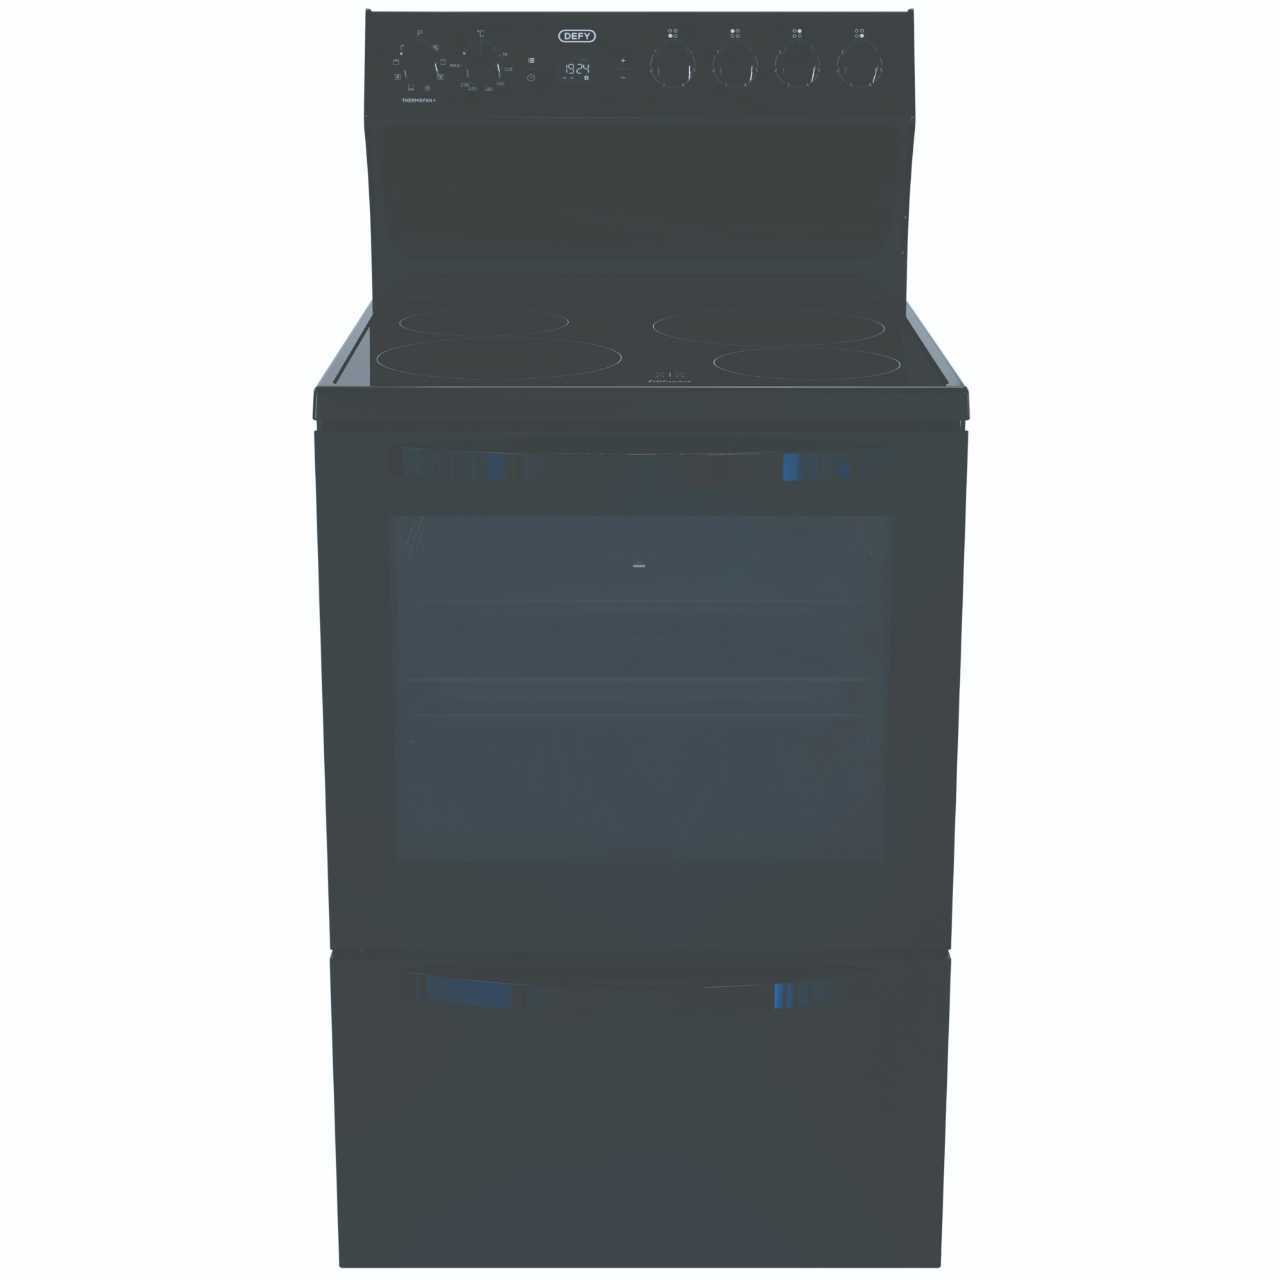 A picture of Defy Stove DSS617 Cooker